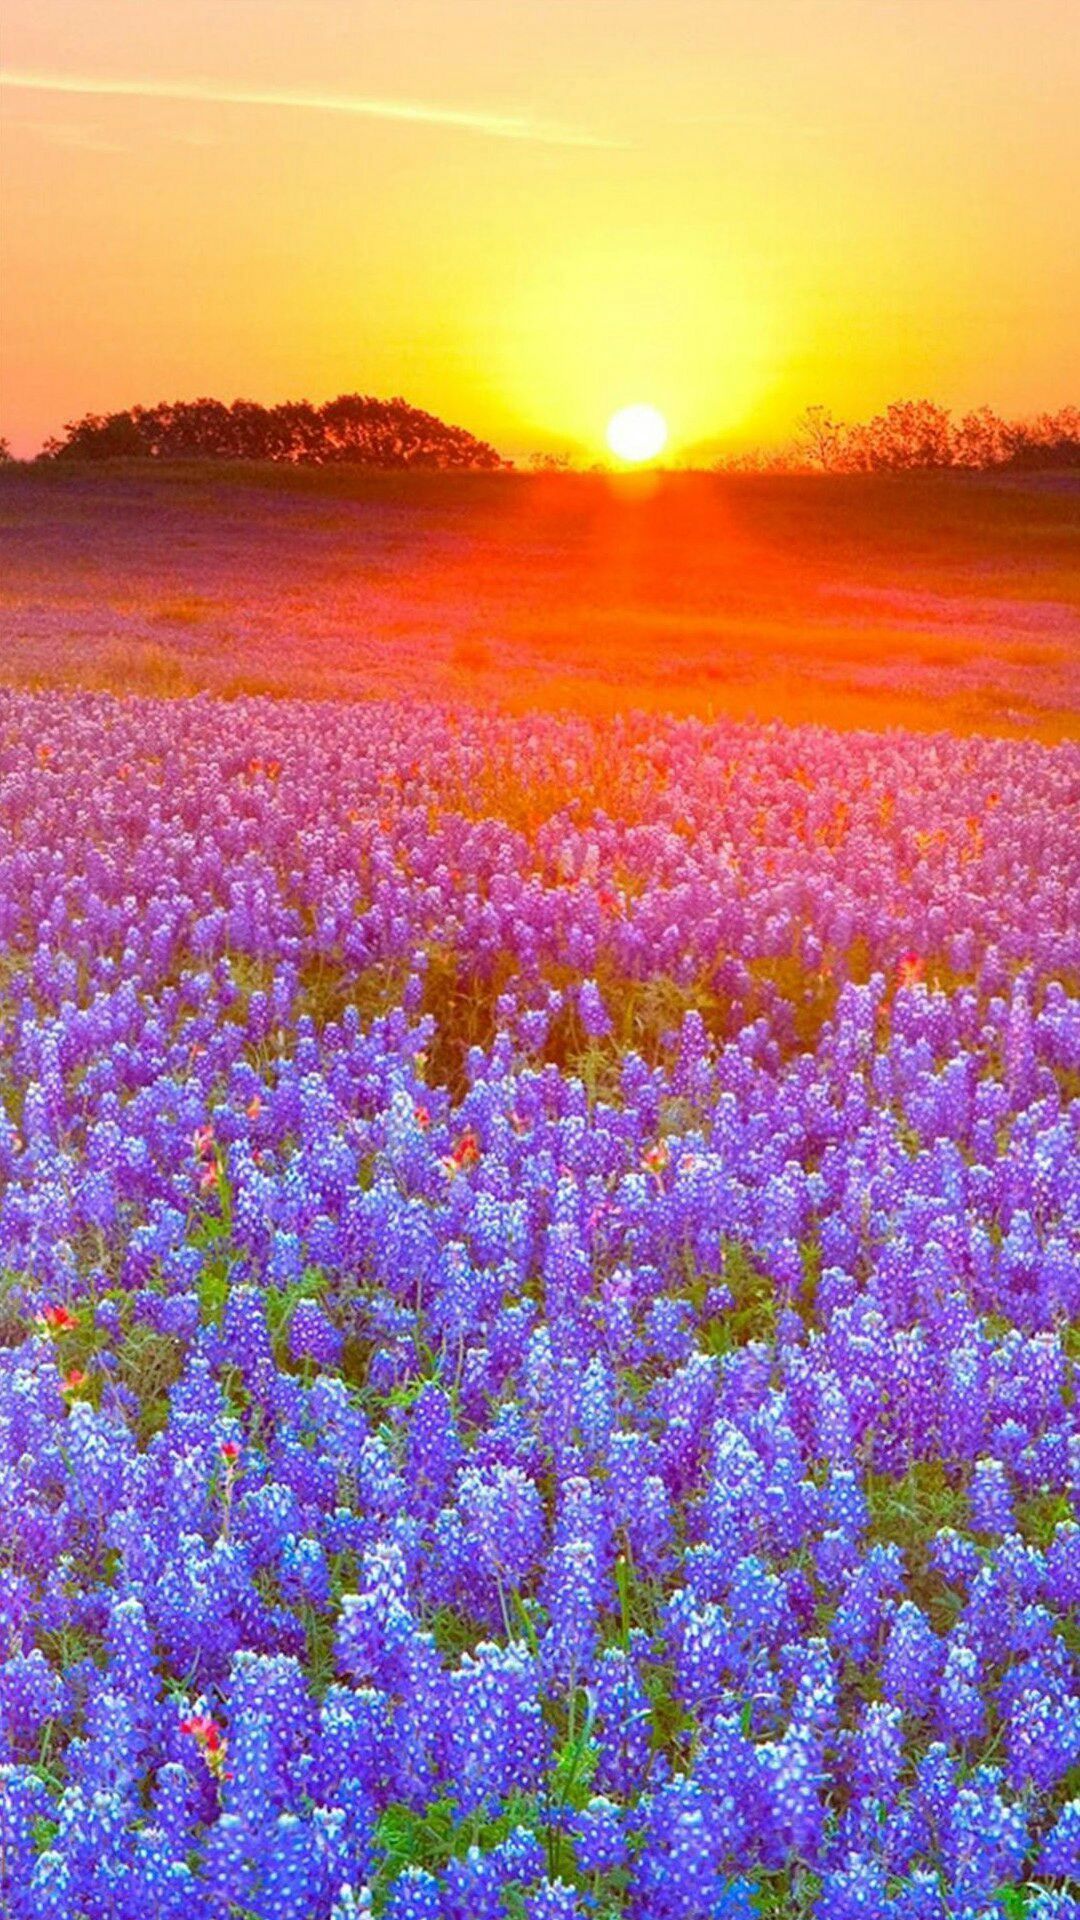 Field of Flowers at Sunset Mobile Wallpaper: Image, Category